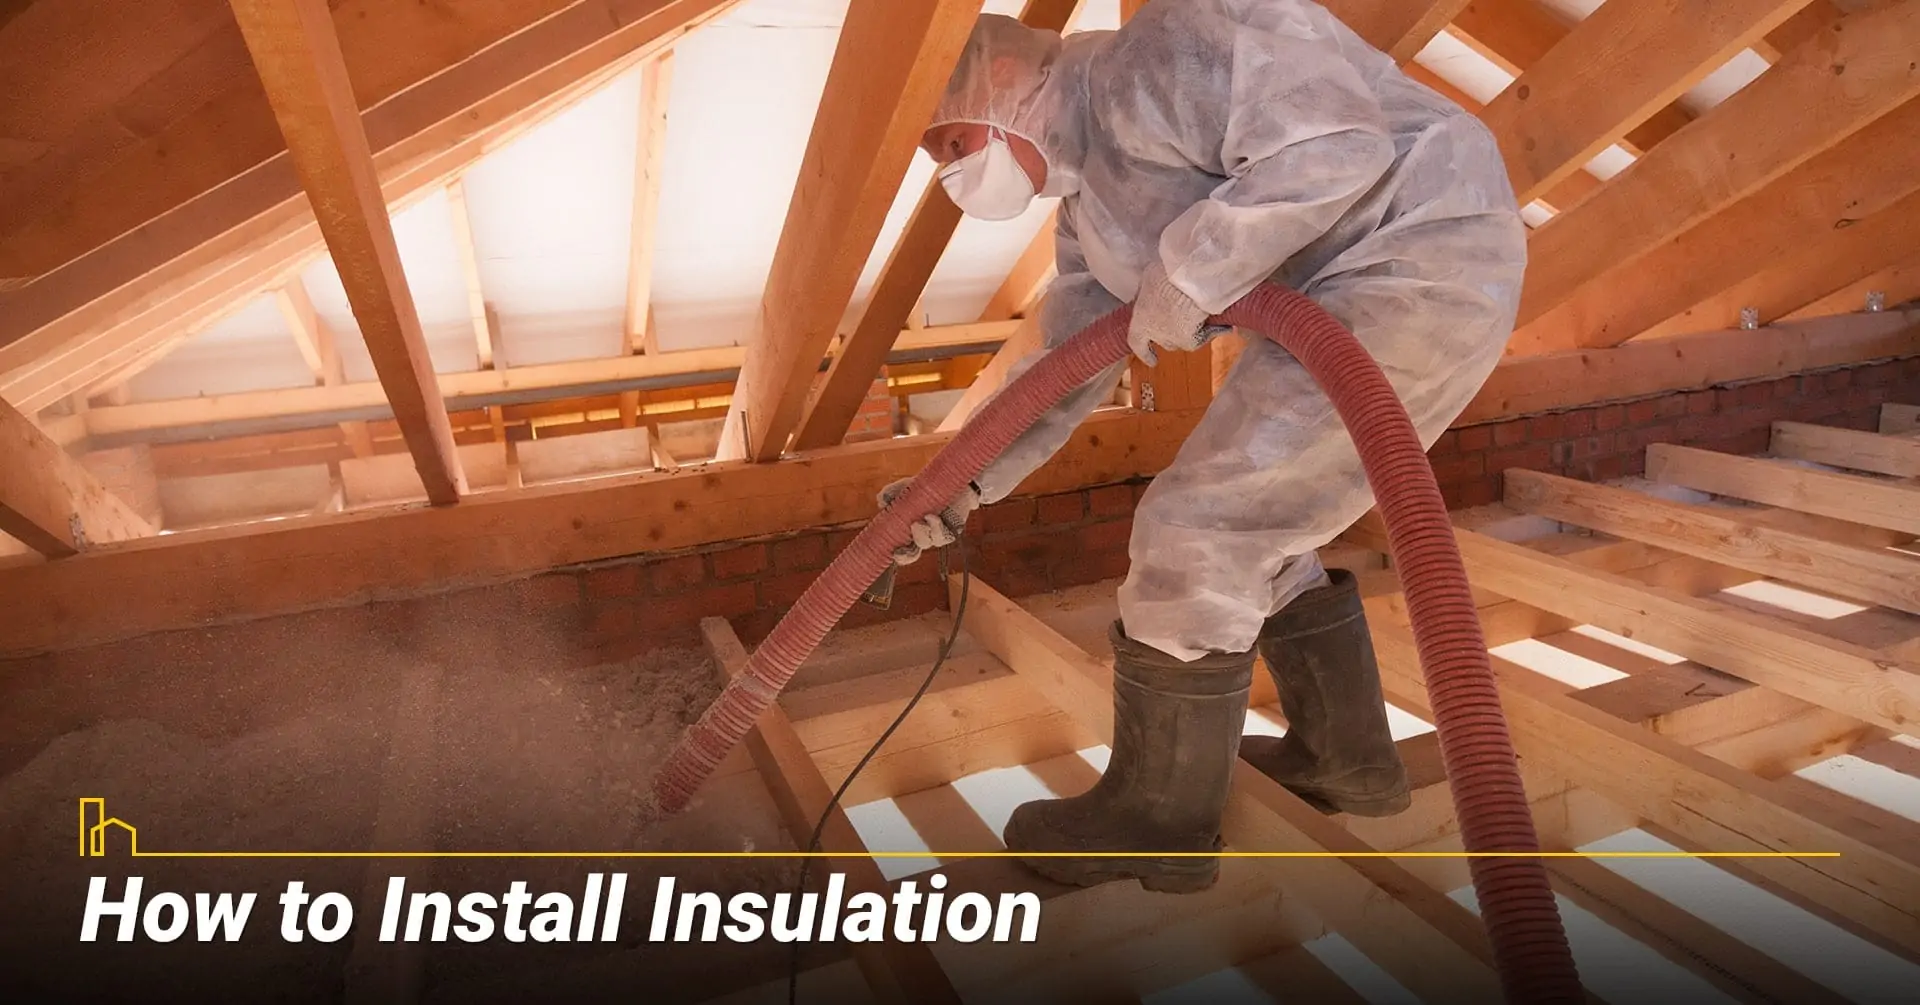 How to Install Insulation, ways to insulate your home